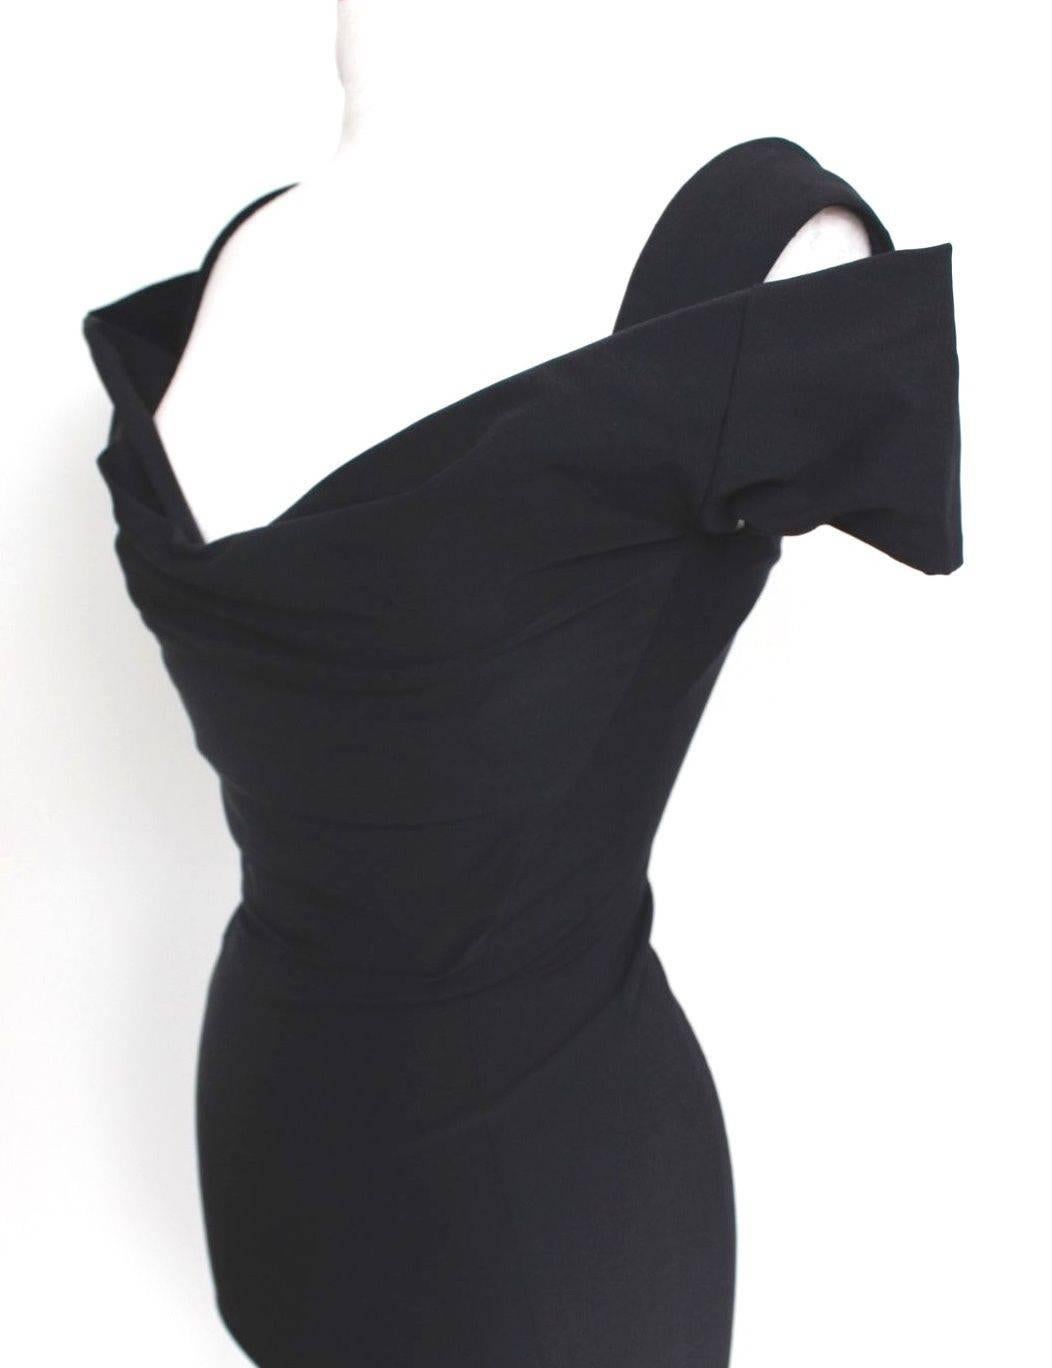 Vivienne Westwood Gold Label Black Corset Dress uk 10 
Classic Westwood corset dress featuring off the shoulder style
Concealed zip fastening along back. 
80% tectal, 20%elastine 
Length 38 inches, chest 17 inches, waist 11 inches, chest 16